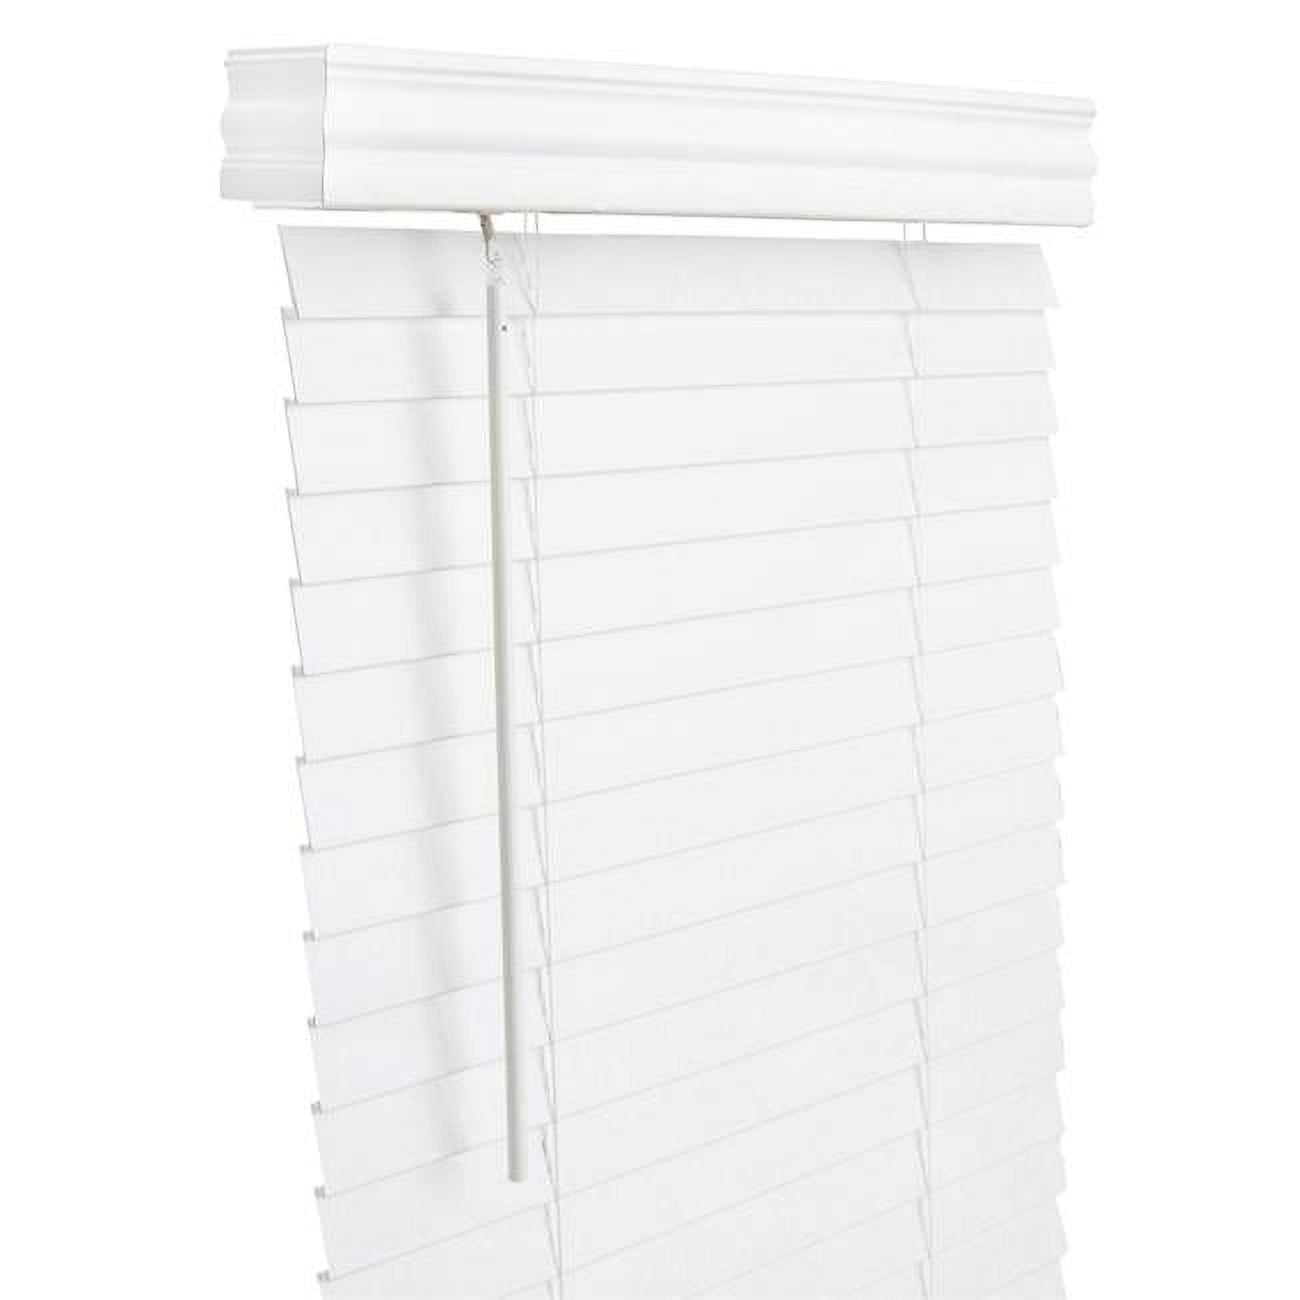 5005719 2 In. Faux Wood Cordless Blinds, White - 34 X 60 In.